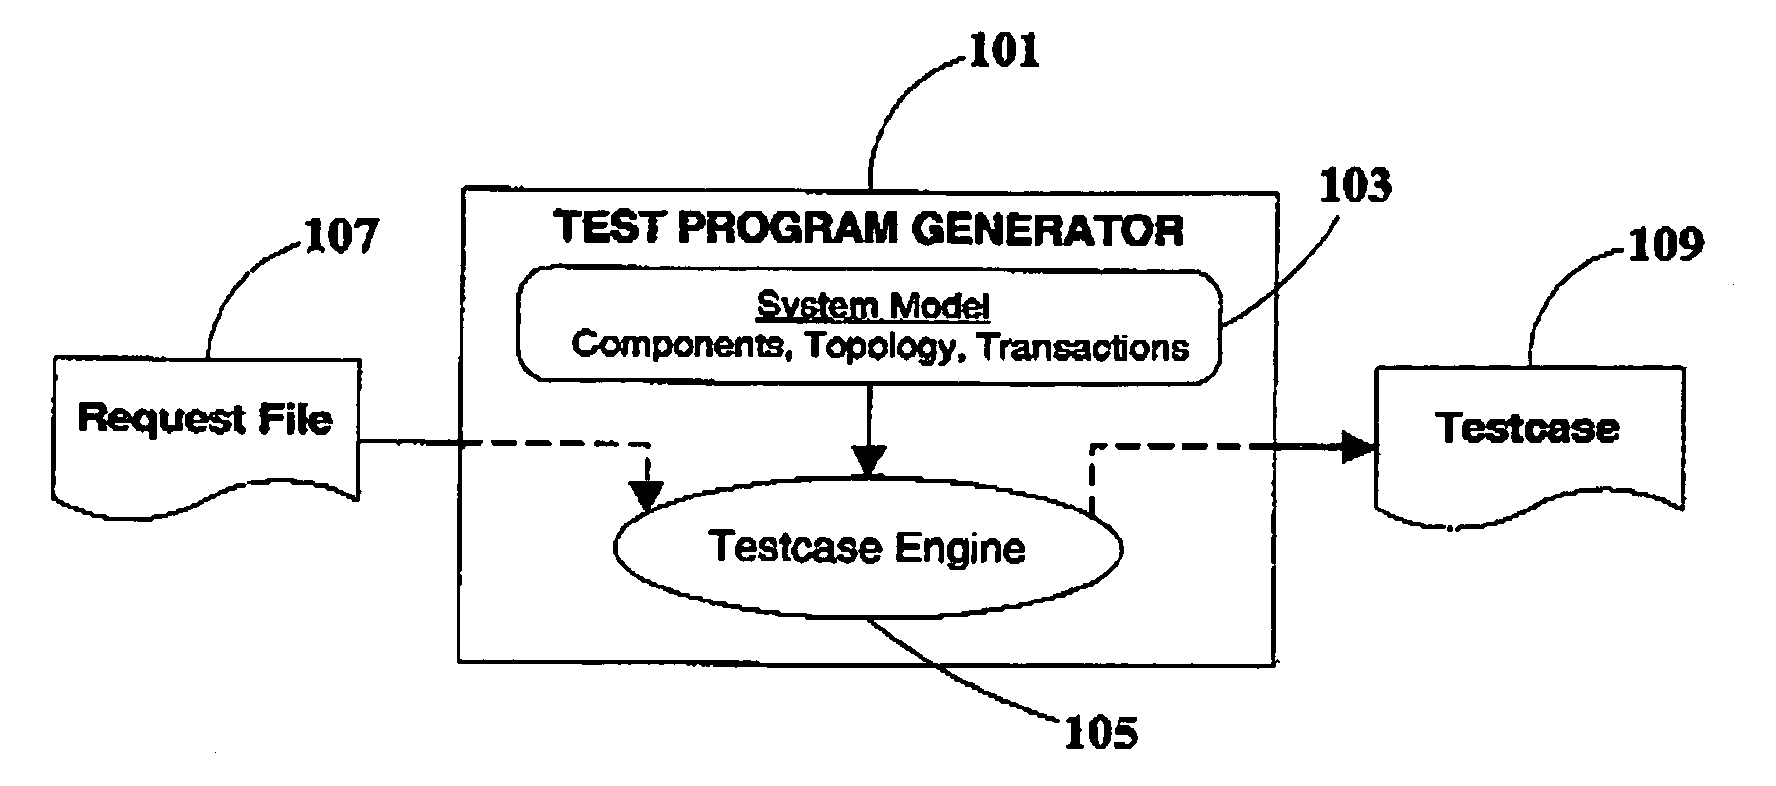 Scheduling of transactions in system-level test program generation